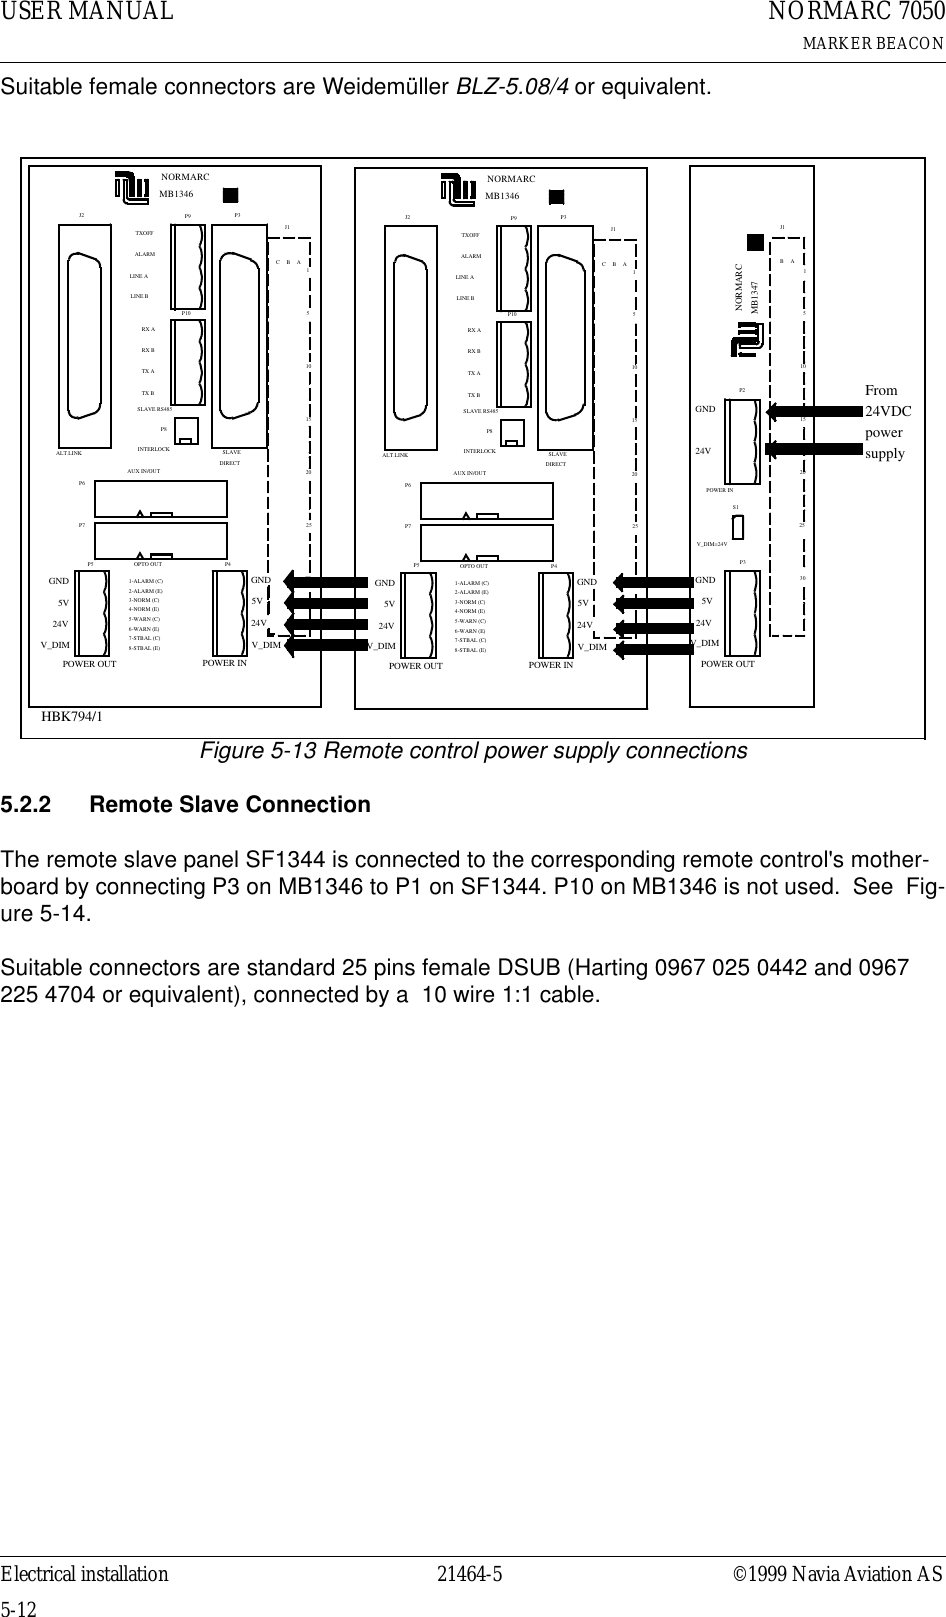 USER MANUAL5-1221464-5NORMARC 7050MARKER BEACONElectrical installation ©1999 Navia Aviation ASSuitable female connectors are Weidemüller BLZ-5.08/4 or equivalent.Figure 5-13 Remote control power supply connections5.2.2 Remote Slave ConnectionThe remote slave panel SF1344 is connected to the corresponding remote control&apos;s mother-board by connecting P3 on MB1346 to P1 on SF1344. P10 on MB1346 is not used.  See  Fig-ure 5-14.Suitable connectors are standard 25 pins female DSUB (Harting 0967 025 0442 and 0967 225 4704 or equivalent), connected by a  10 wire 1:1 cable.J2 P3P6P7P4P5P9P10P8NORMARCOPTO OUT2-ALARM (E)1-ALARM (C)4-NORM (E)5-WARN (C)6-WARN (E)7-STBAL (C)8-STBAL (E)3-NORM (C)GND5V24VV_DIMGND5V24VV_DIMPOWER OUT POWER INAUX IN/OUTSLAVEDIRECTINTERLOCKTXOFFALARMLINE ALINE BRX ARX BTX ATX BSLAVE RS485J1ABC153020251510ALT.LINKMB1346P2P3S1GND24VPOWER INGND5V24VV_DIMPOWER OUTV_DIM=24VMB1347NORMARC302520151051ABJ1J2 P3P6P7P4P5P9P10P8NORMARCOPTO OUT2-ALARM (E)1-ALARM (C)4-NORM (E)5-WARN (C)6-WARN (E)7-STBAL (C)8-STBAL (E)3-NORM (C)GND5V24VV_DIMGND5V24VV_DIMPOWER OUT POWER INAUX IN/OUTSLAVEDIRECTINTERLOCKTXOFFALARMLINE ALINE BRX ARX BTX ATX BSLAVE RS485J1ABC153020251510ALT.LINKMB1346From 24VDCpowersupplyHBK794/1